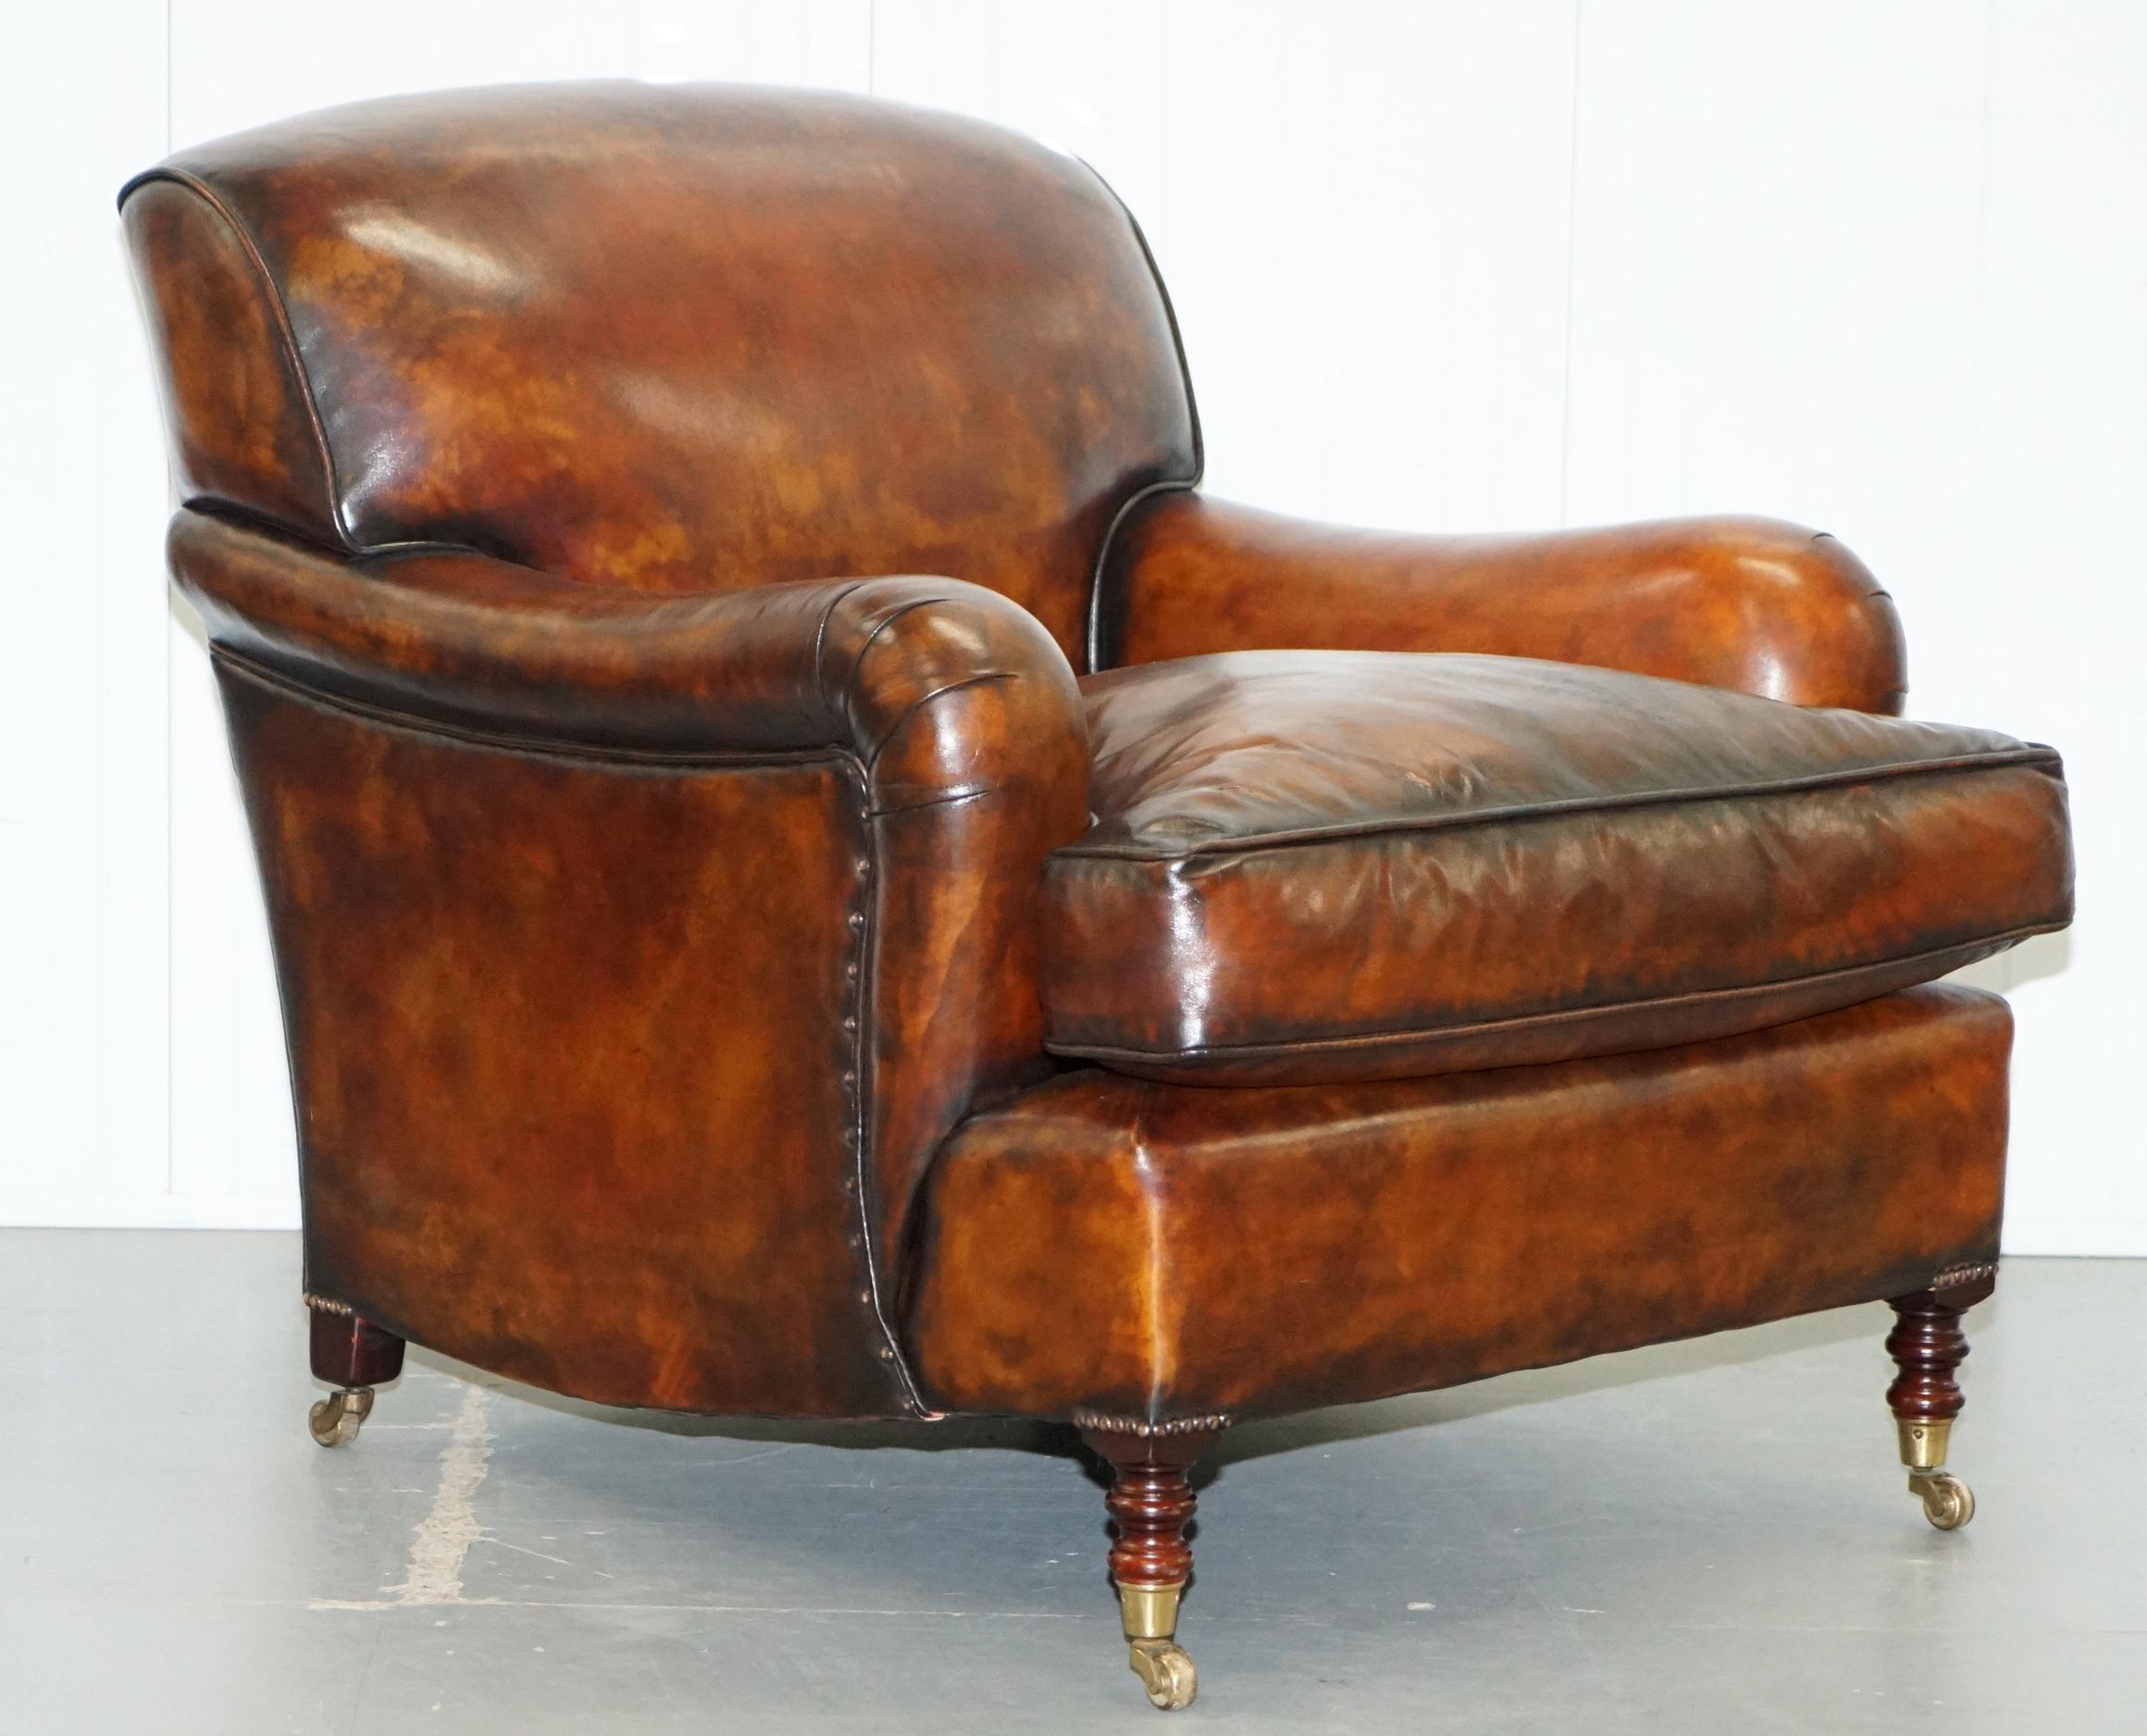 We are delighted to offer for sale this stunning pair of original handmade in England George Smith Signature hand dyed cigar brown leather club armchairs RRP £13,000

These are the finest handmade in England chairs you will find today buy one of